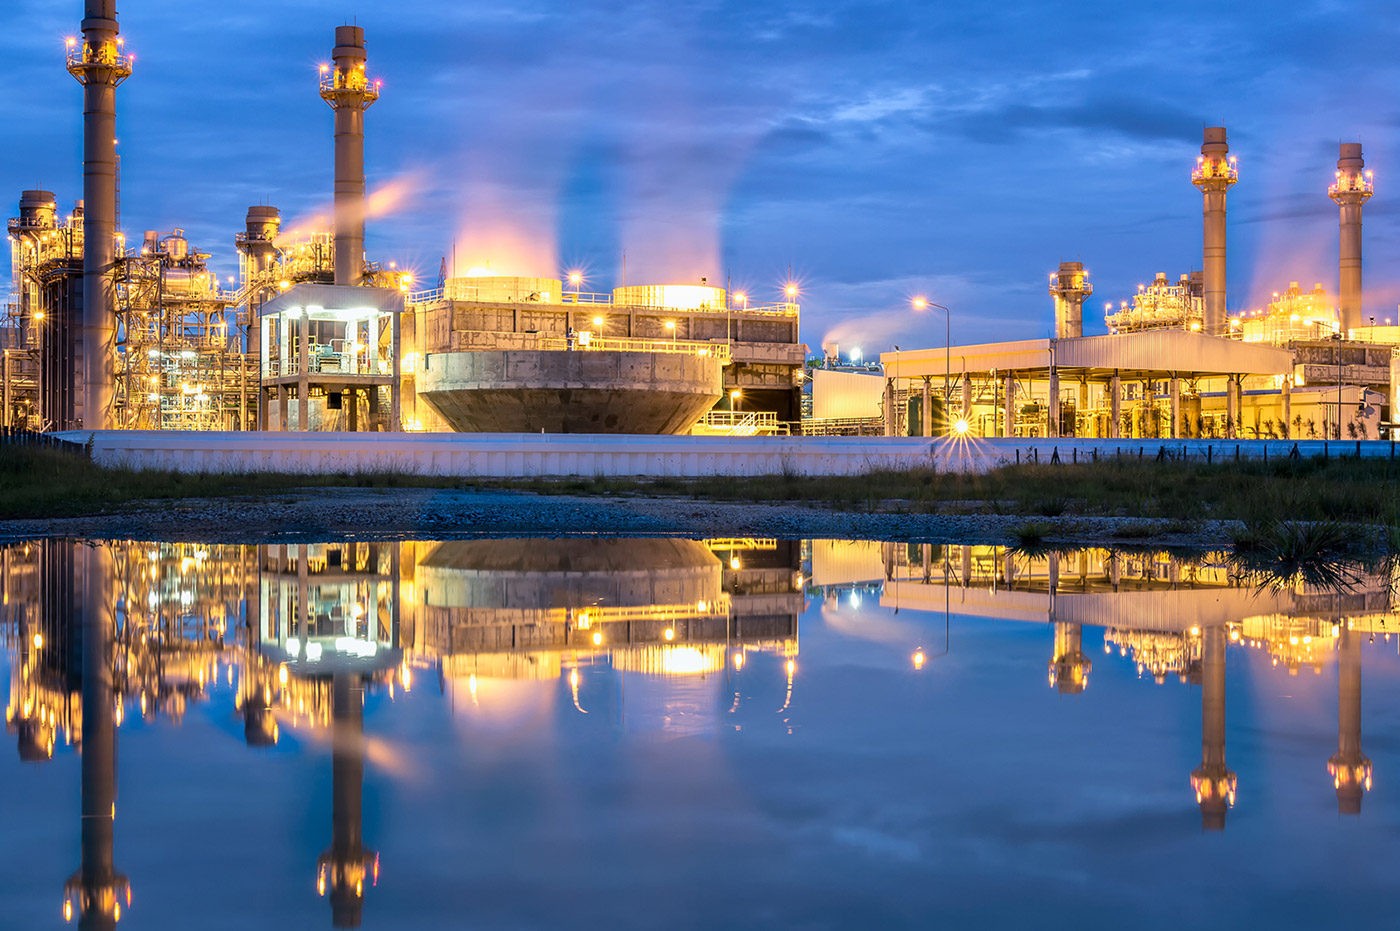 A large powerplant situated next to a body of water, with the reflection of the powerplant.